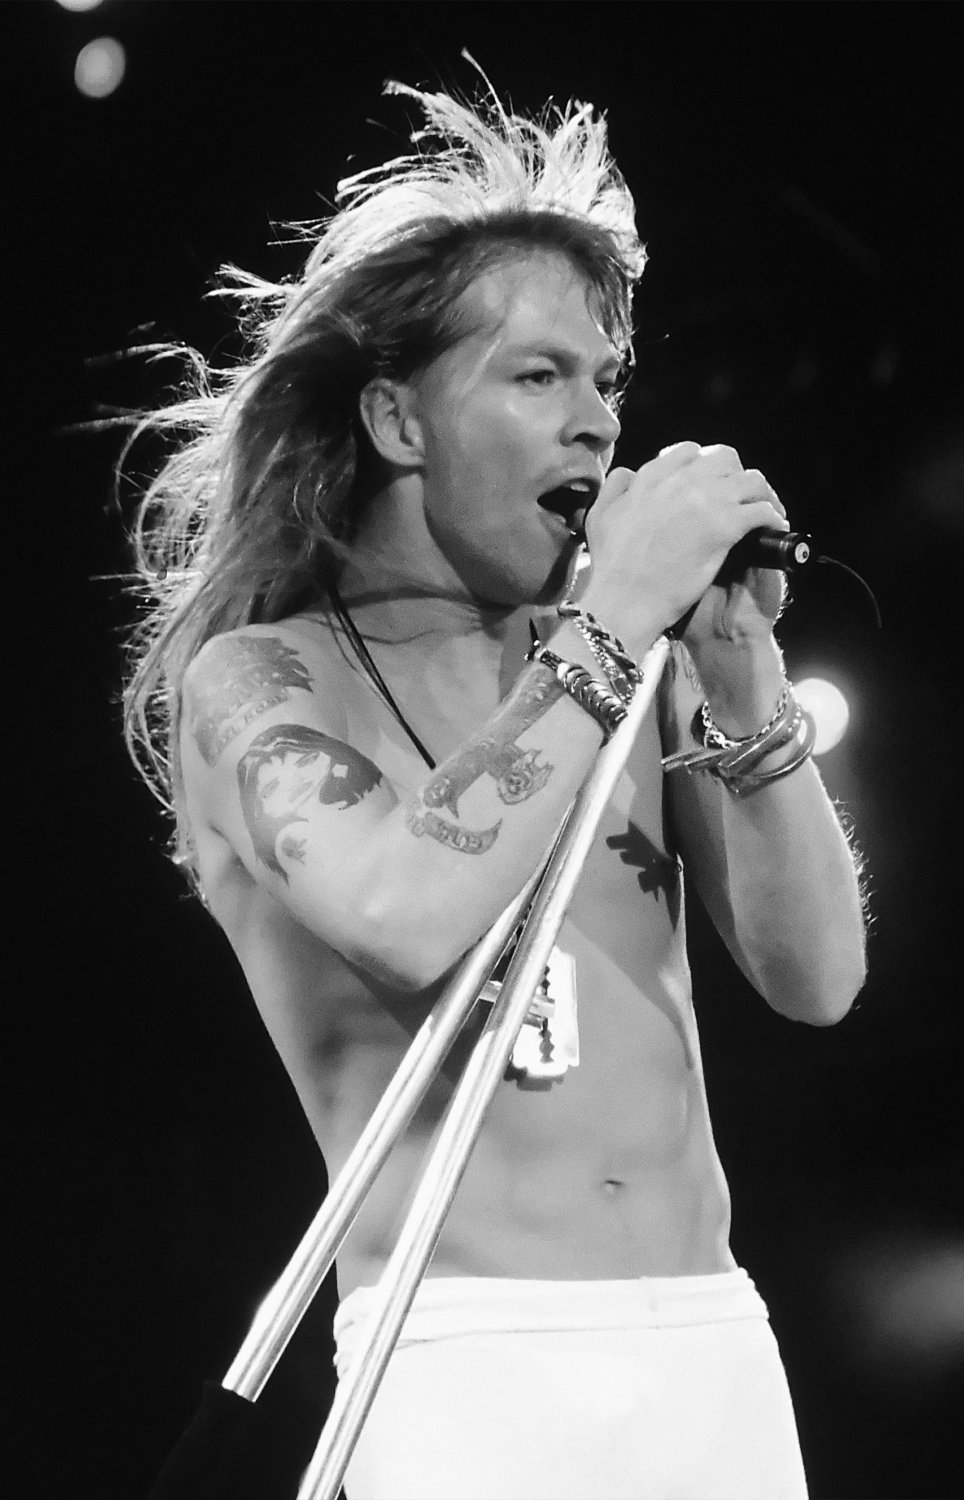 Axl Rose  13"x19" (32cm/49cm) Polyester Fabric Poster